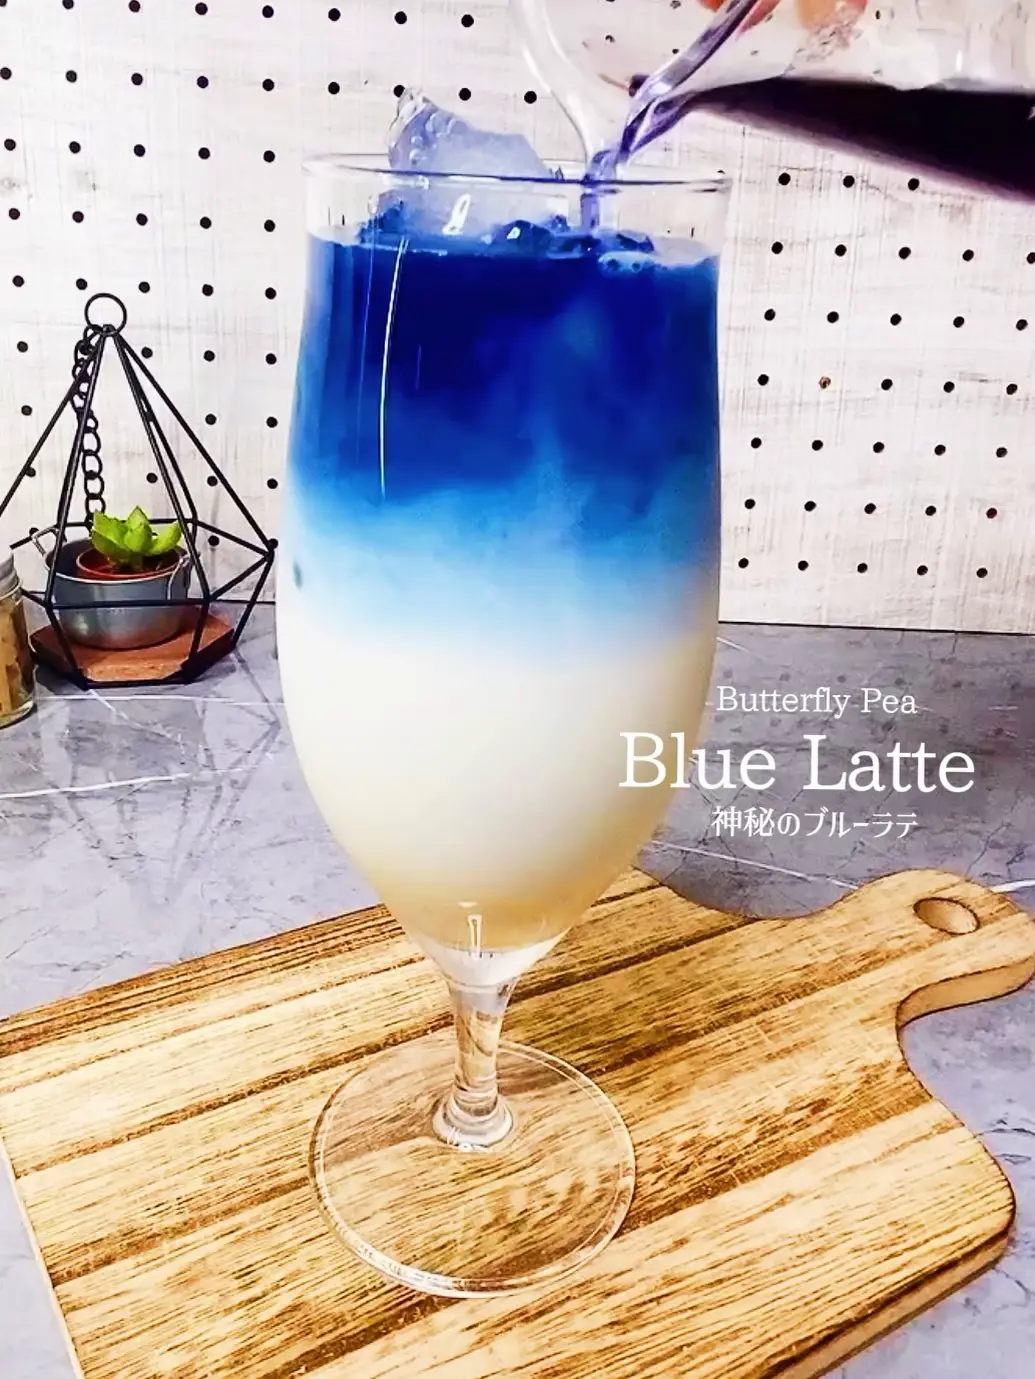 Mysterious Blue Herb Tea 💙 Butterfly Pea Blue Latte🦋, Gallery posted by  ジュニカフェ𓌉𓇋レシピ